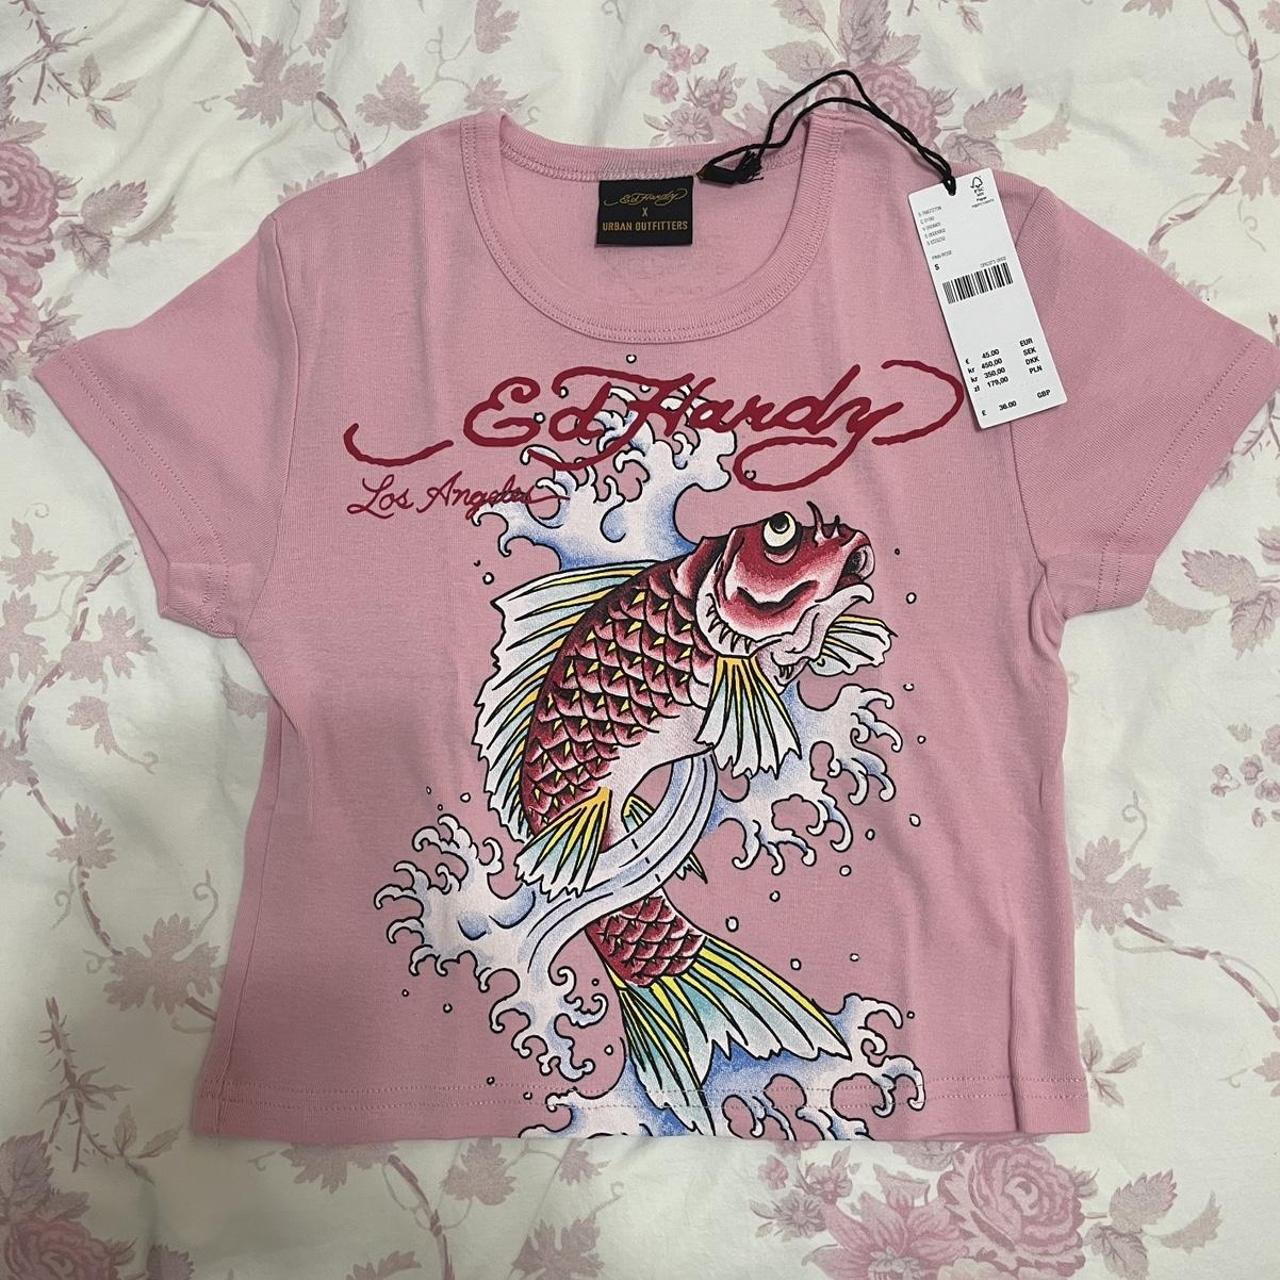 Ed Hardy X Urban Outfitters pink baby tee Brand new... - Depop